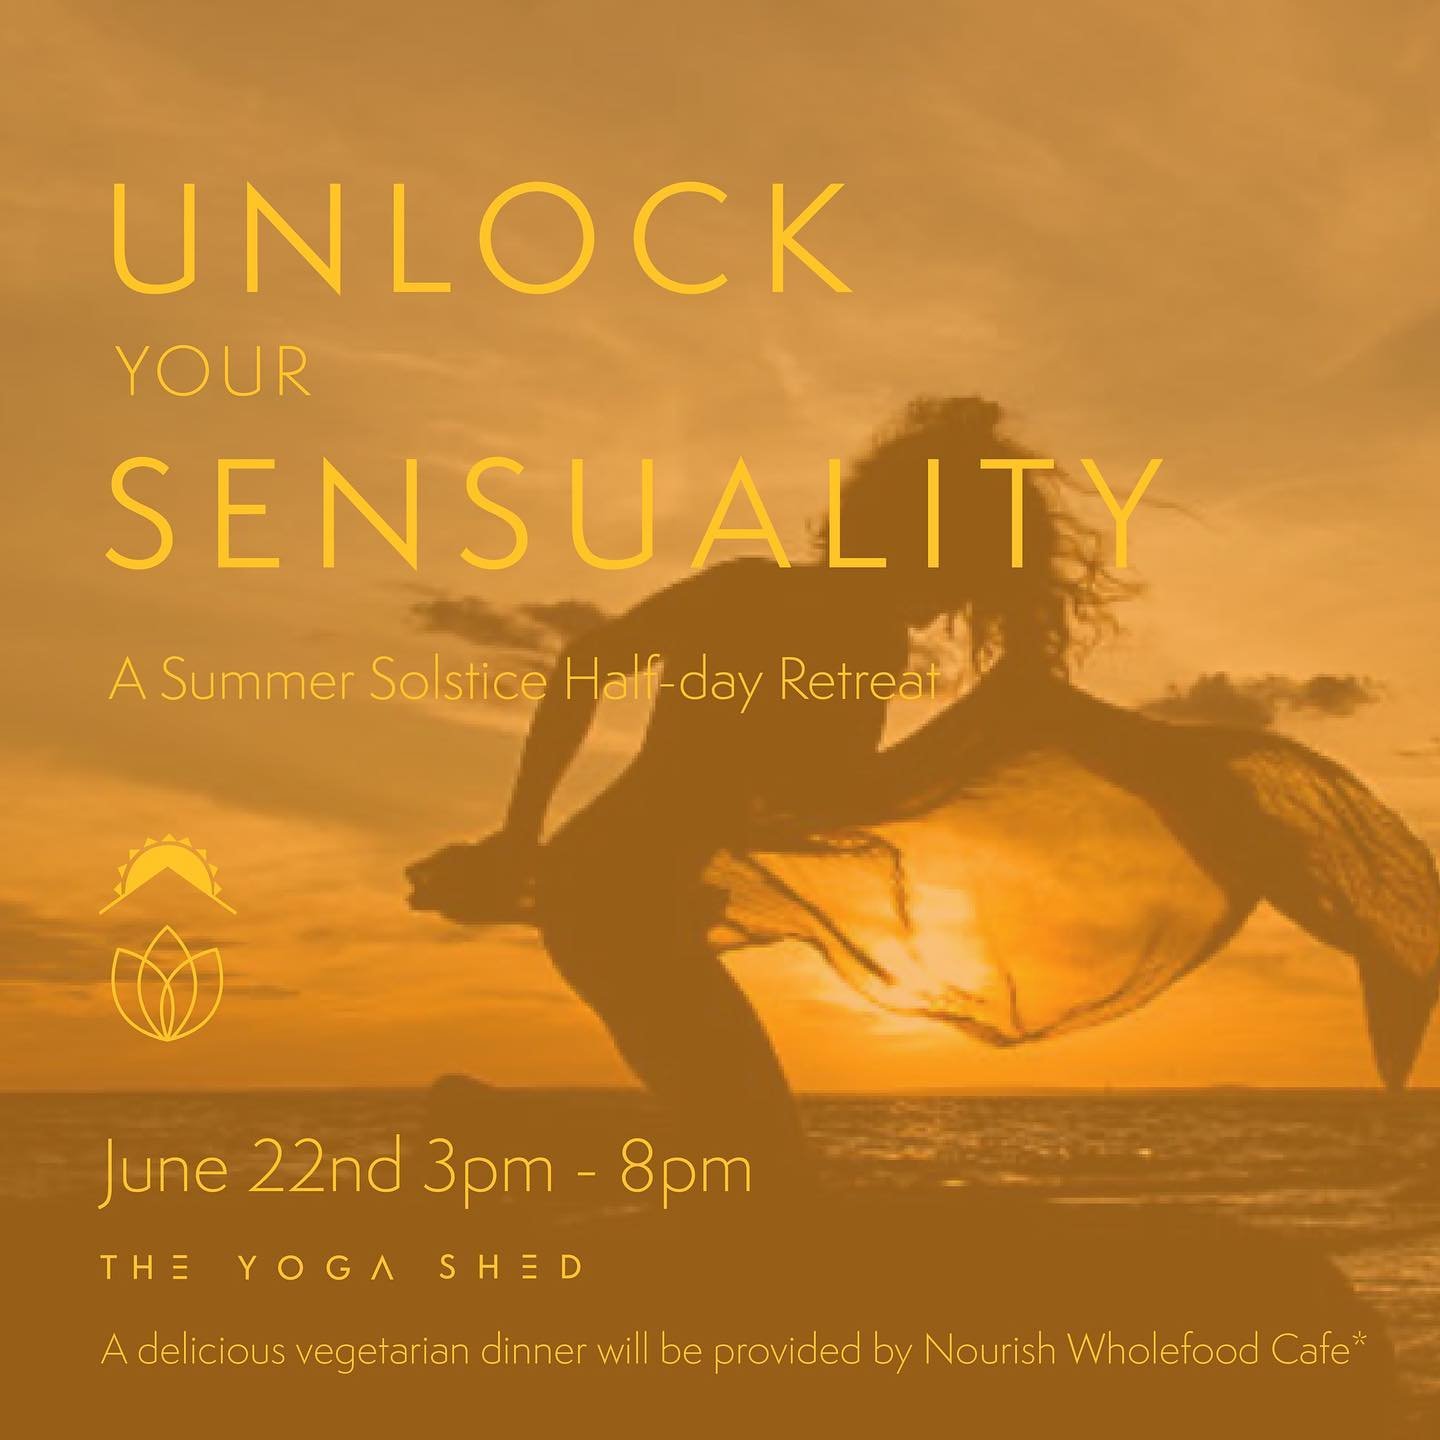 On this rainy day we look towards the sunny days ahead for summer 🌤 Join us for a unique experience where you can tap into your sensuality and embrace your empowered feminine energy. Discover the warmth within you enhanced by the magic of the Summer